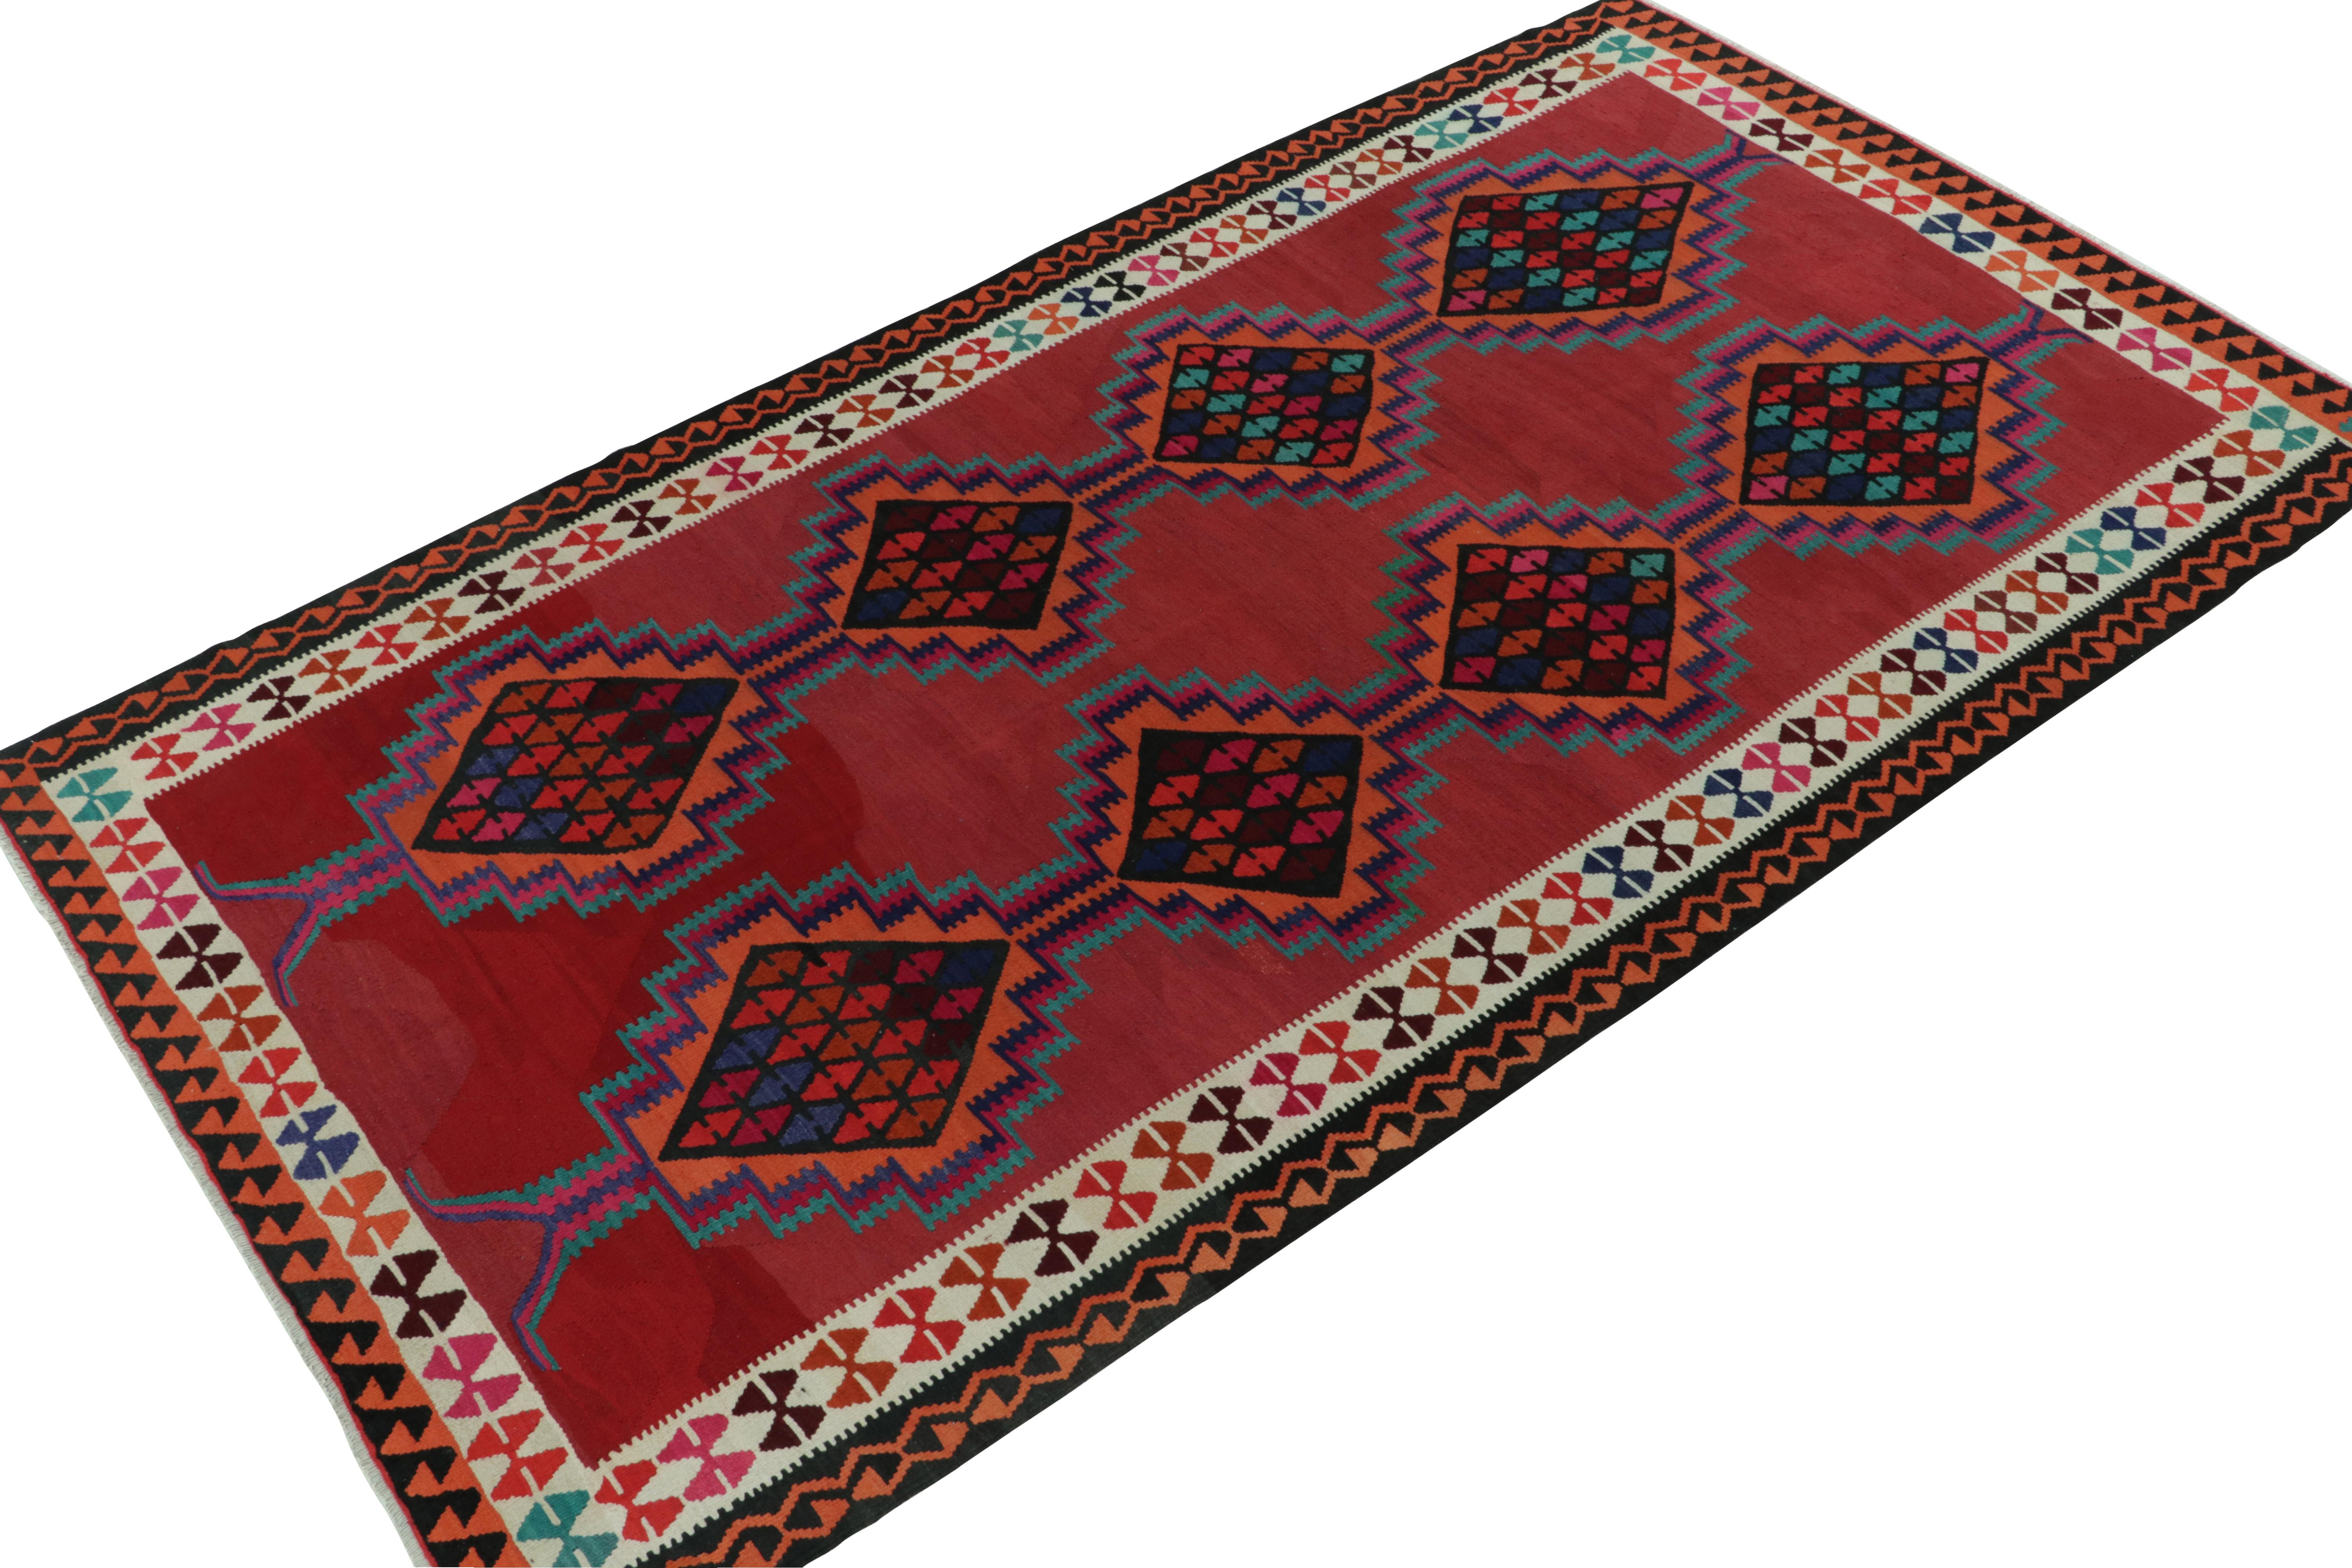 Originating from Turkey circa 1950-1960, a mid-century kilim rug. Featuring a well defined traditional pattern in vivid tones of red, orange, blue and brown with alluring and bold accents, a piece thriving in good condition for an array of projects.